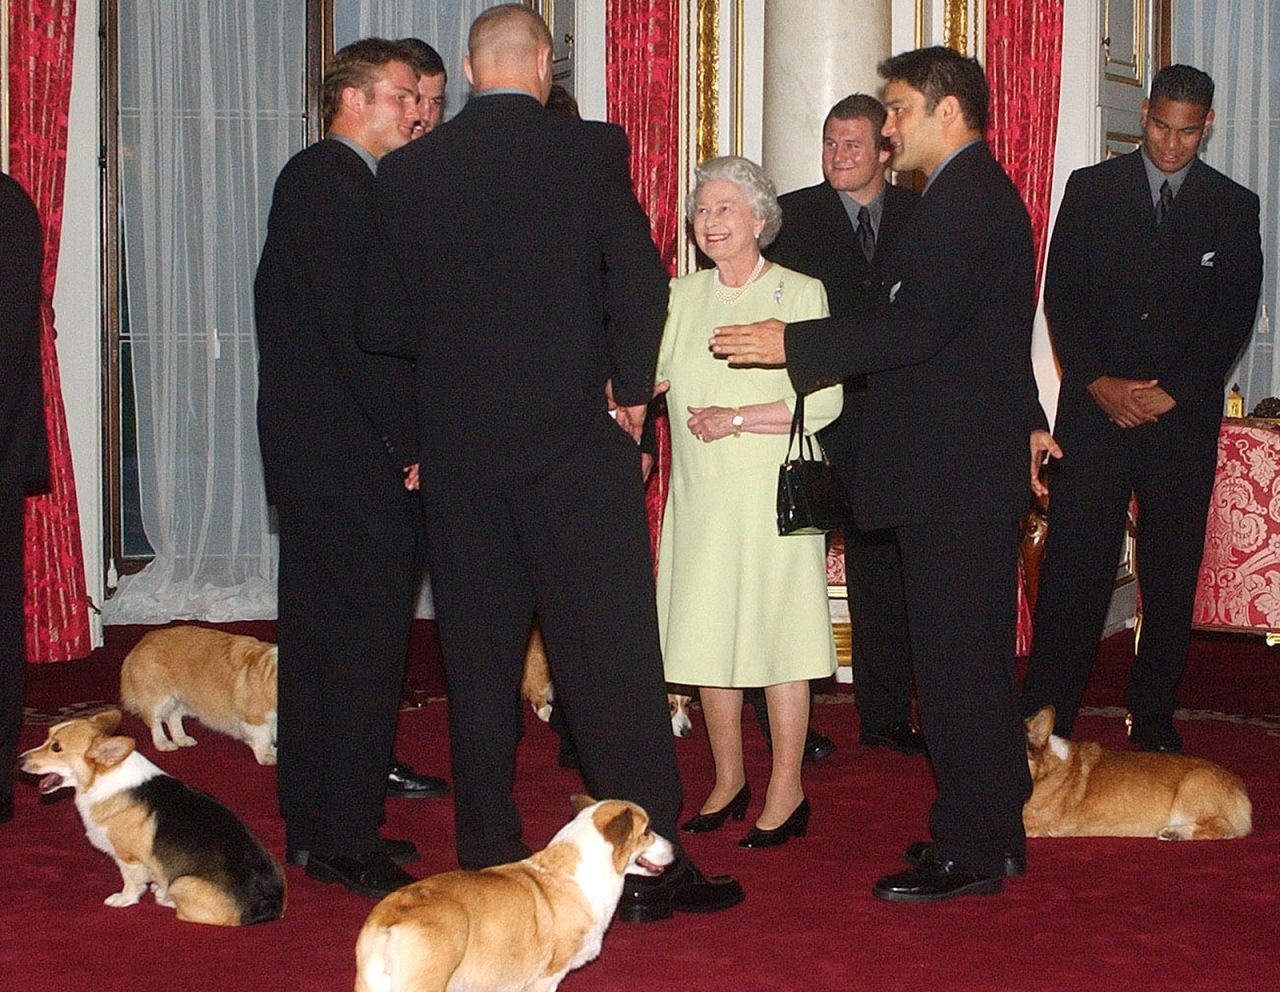 The Queen's dogs are all around her at Buckingham Palace as she meets the New Zealand rugby team in 2002.